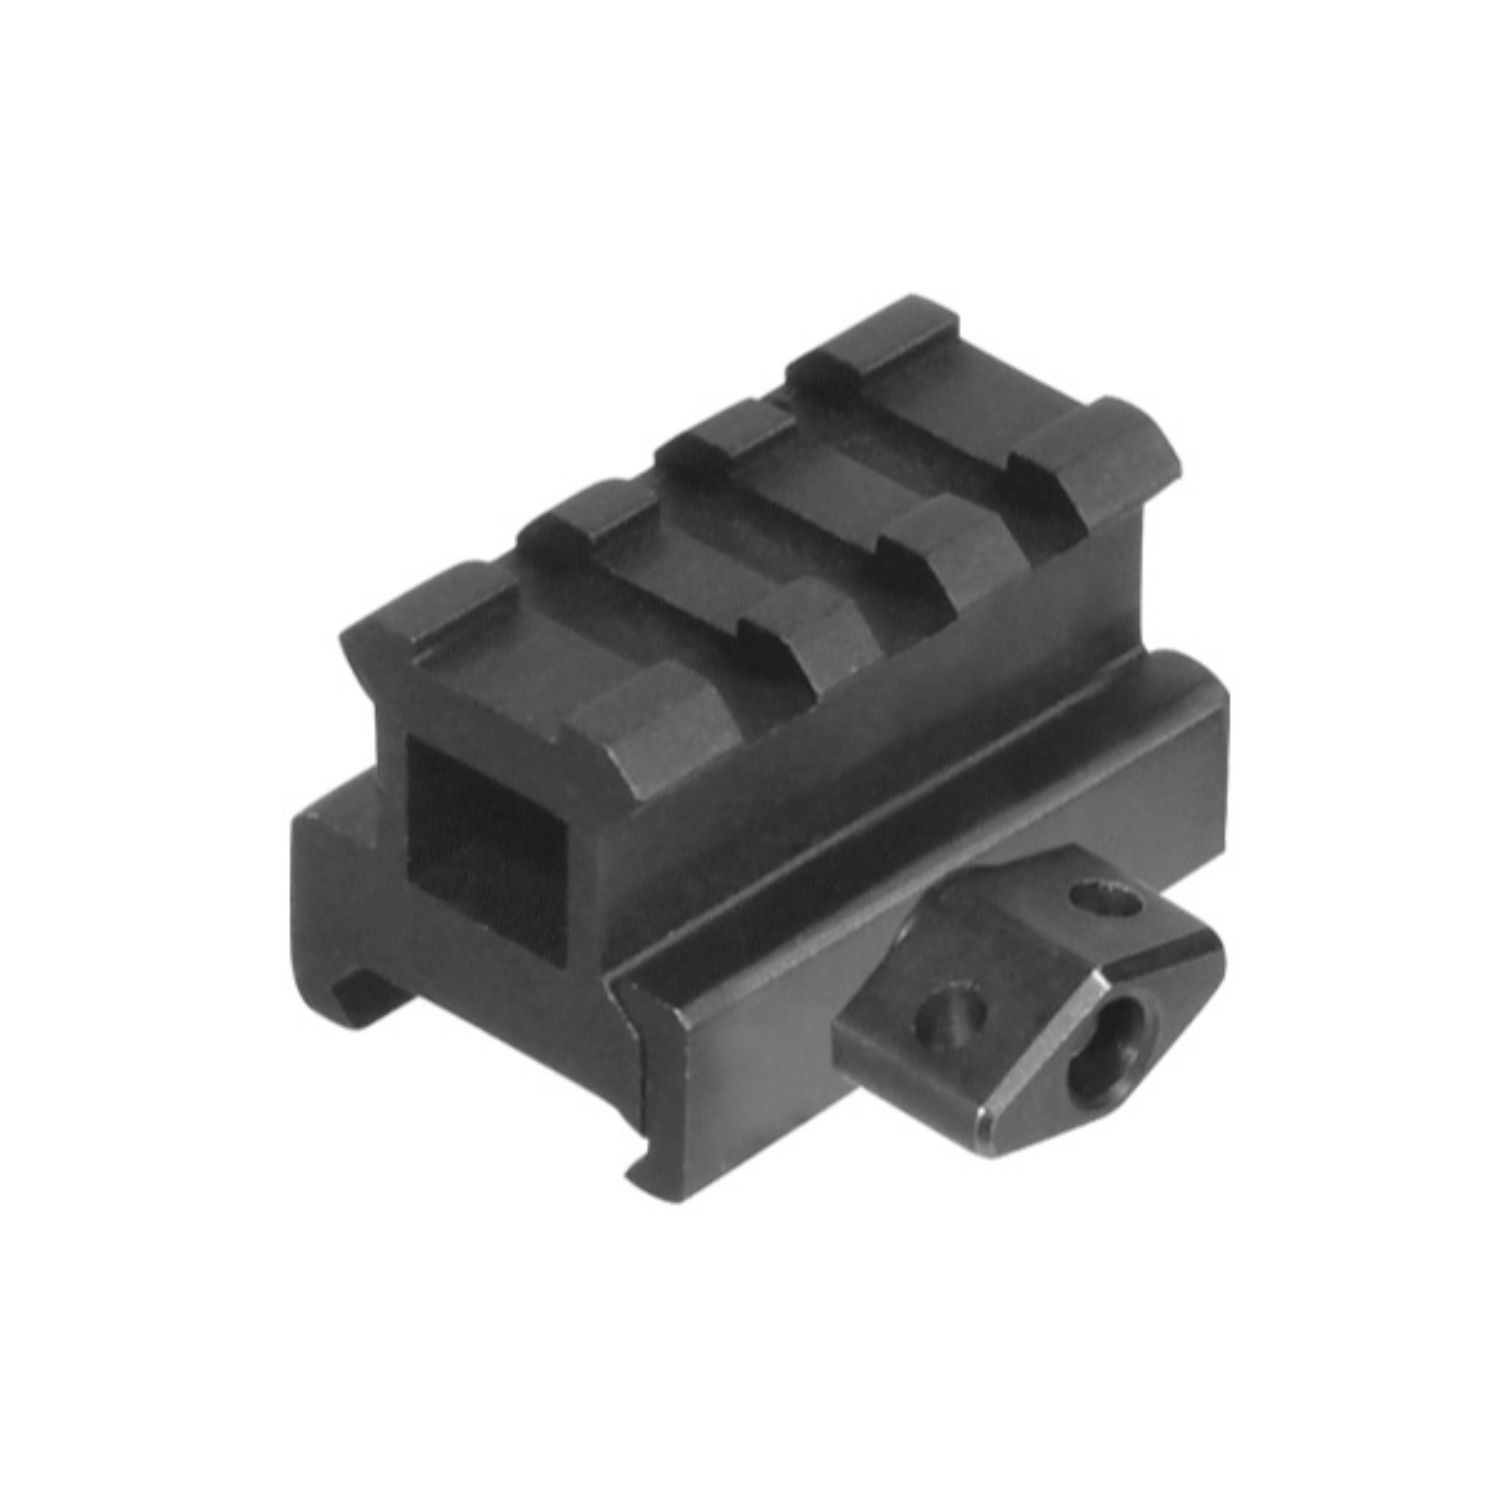 Leapers UTG Med-pro Compact Riser Mount 0.83in High 3 Slots